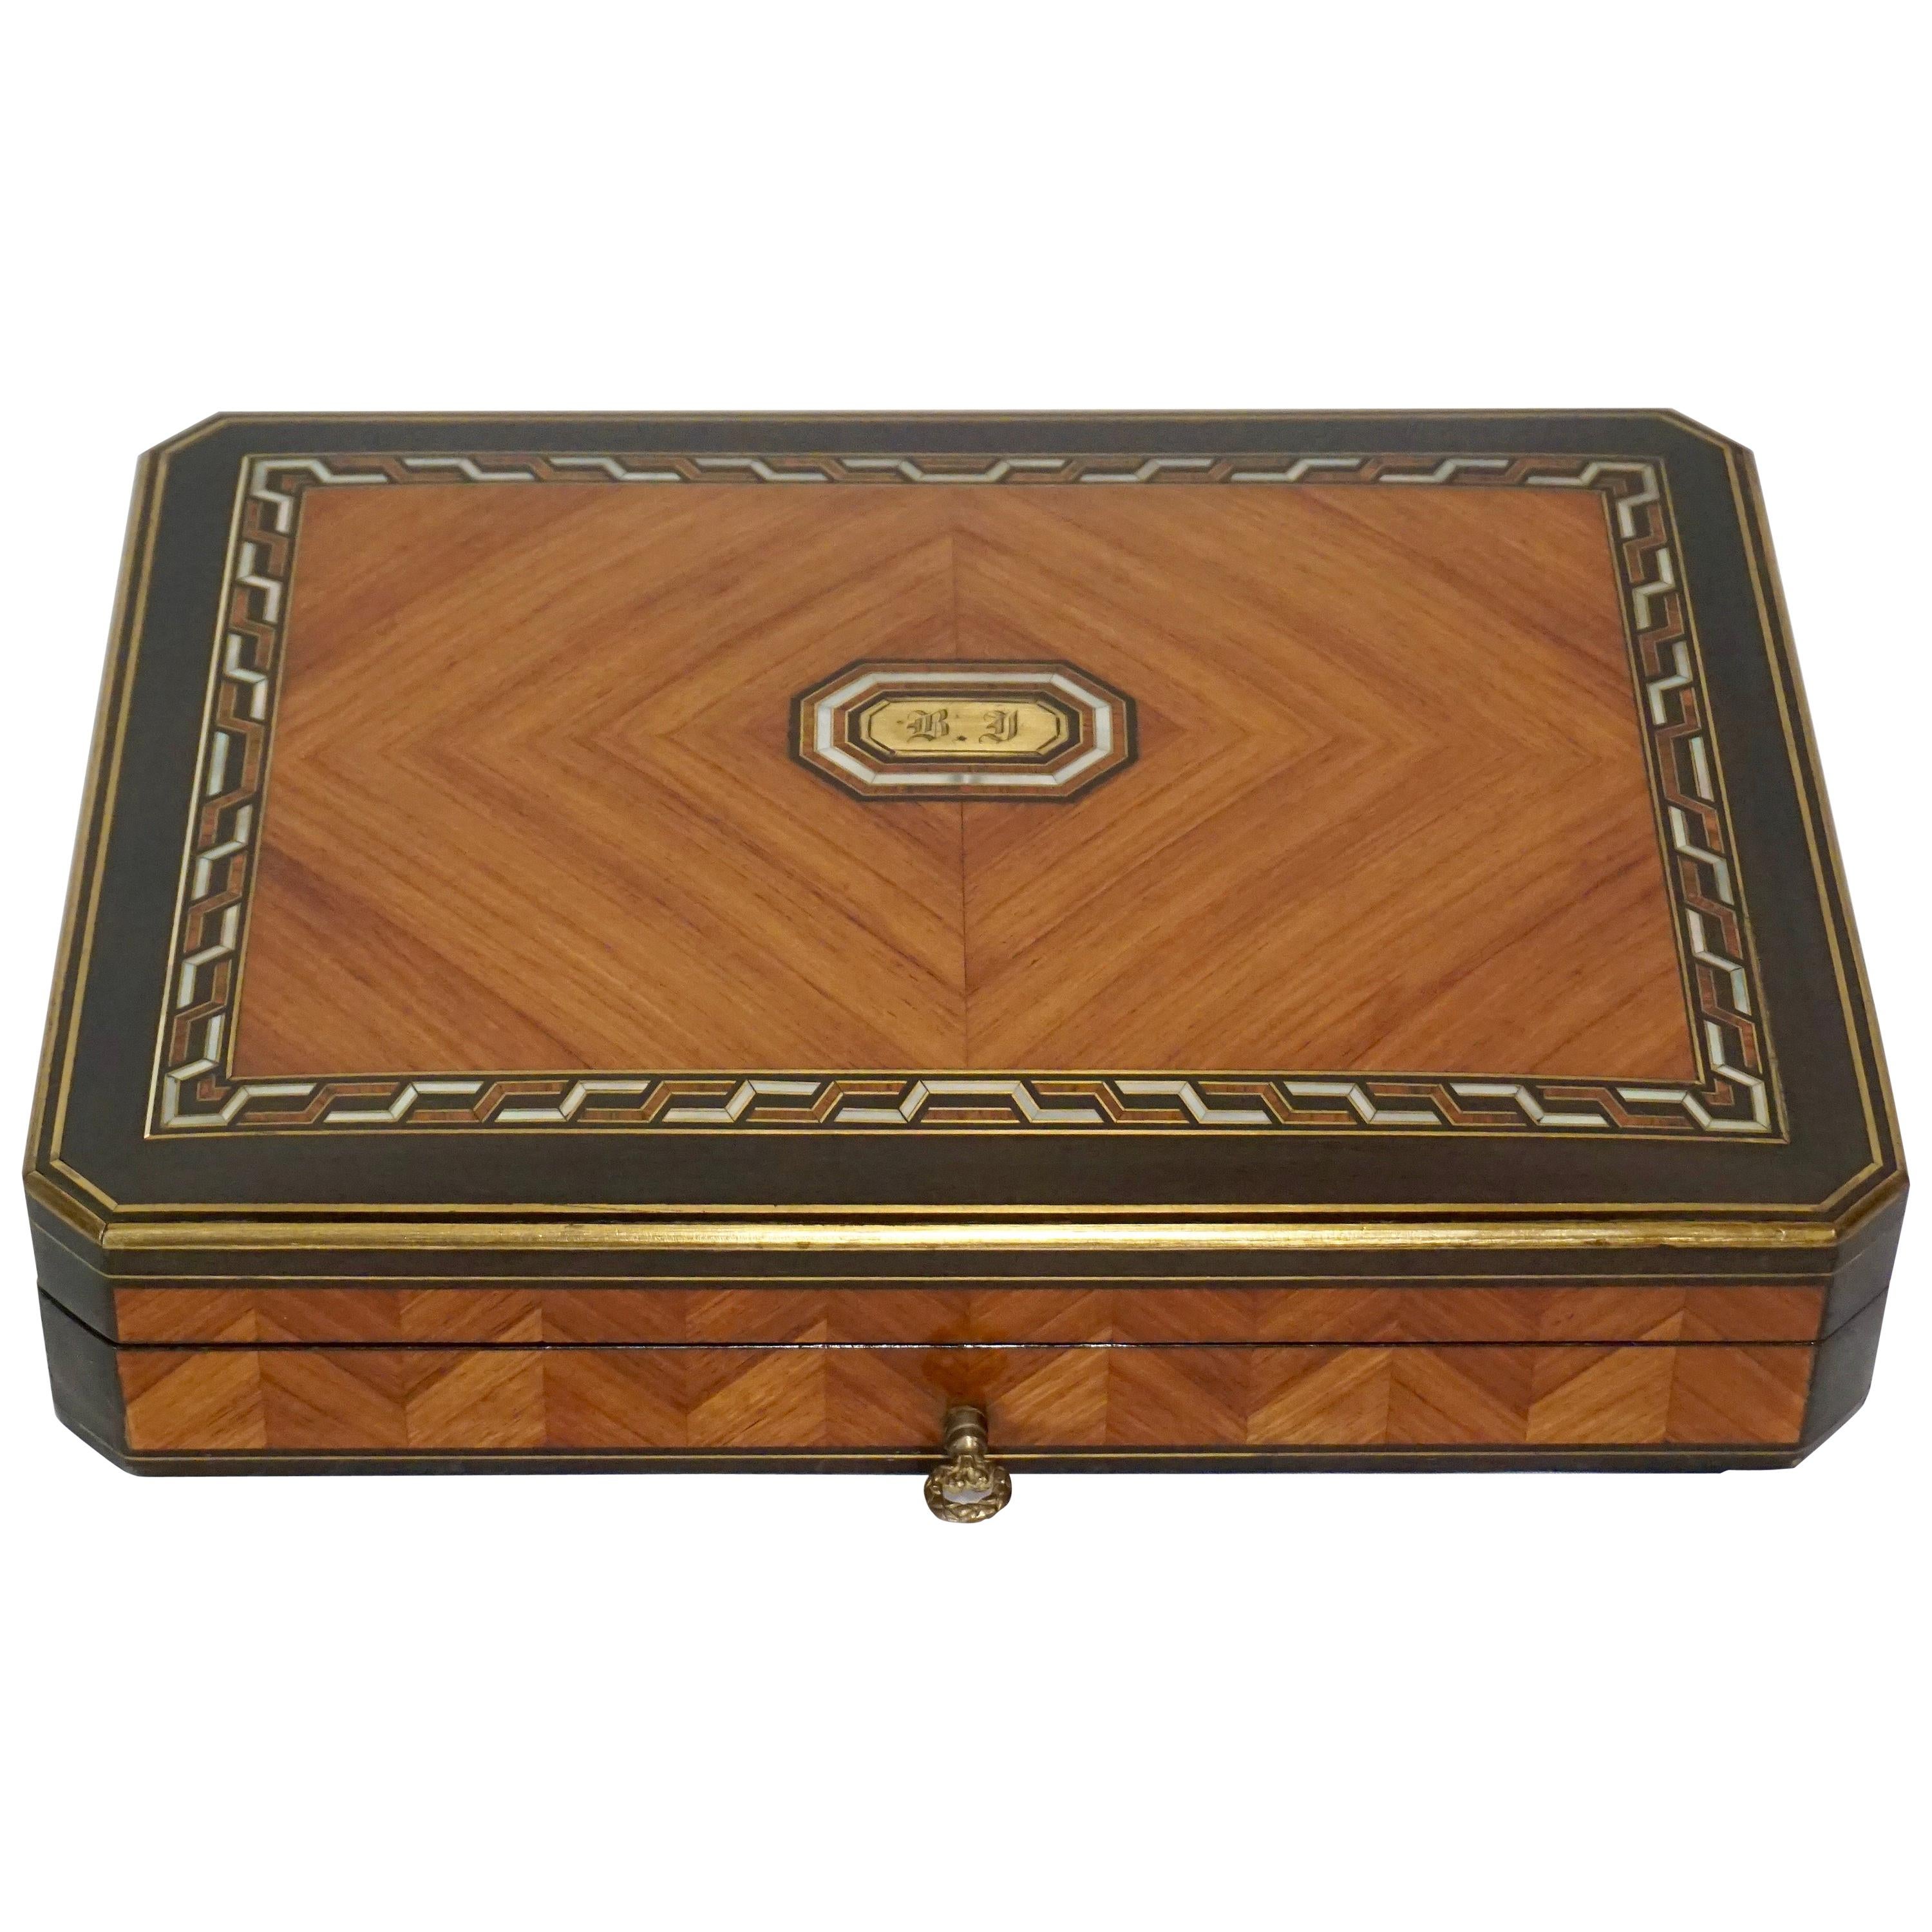 Swiss Kingwood, Nacre, and Brass Inlaid Card Games Box, Complete, circa 1890